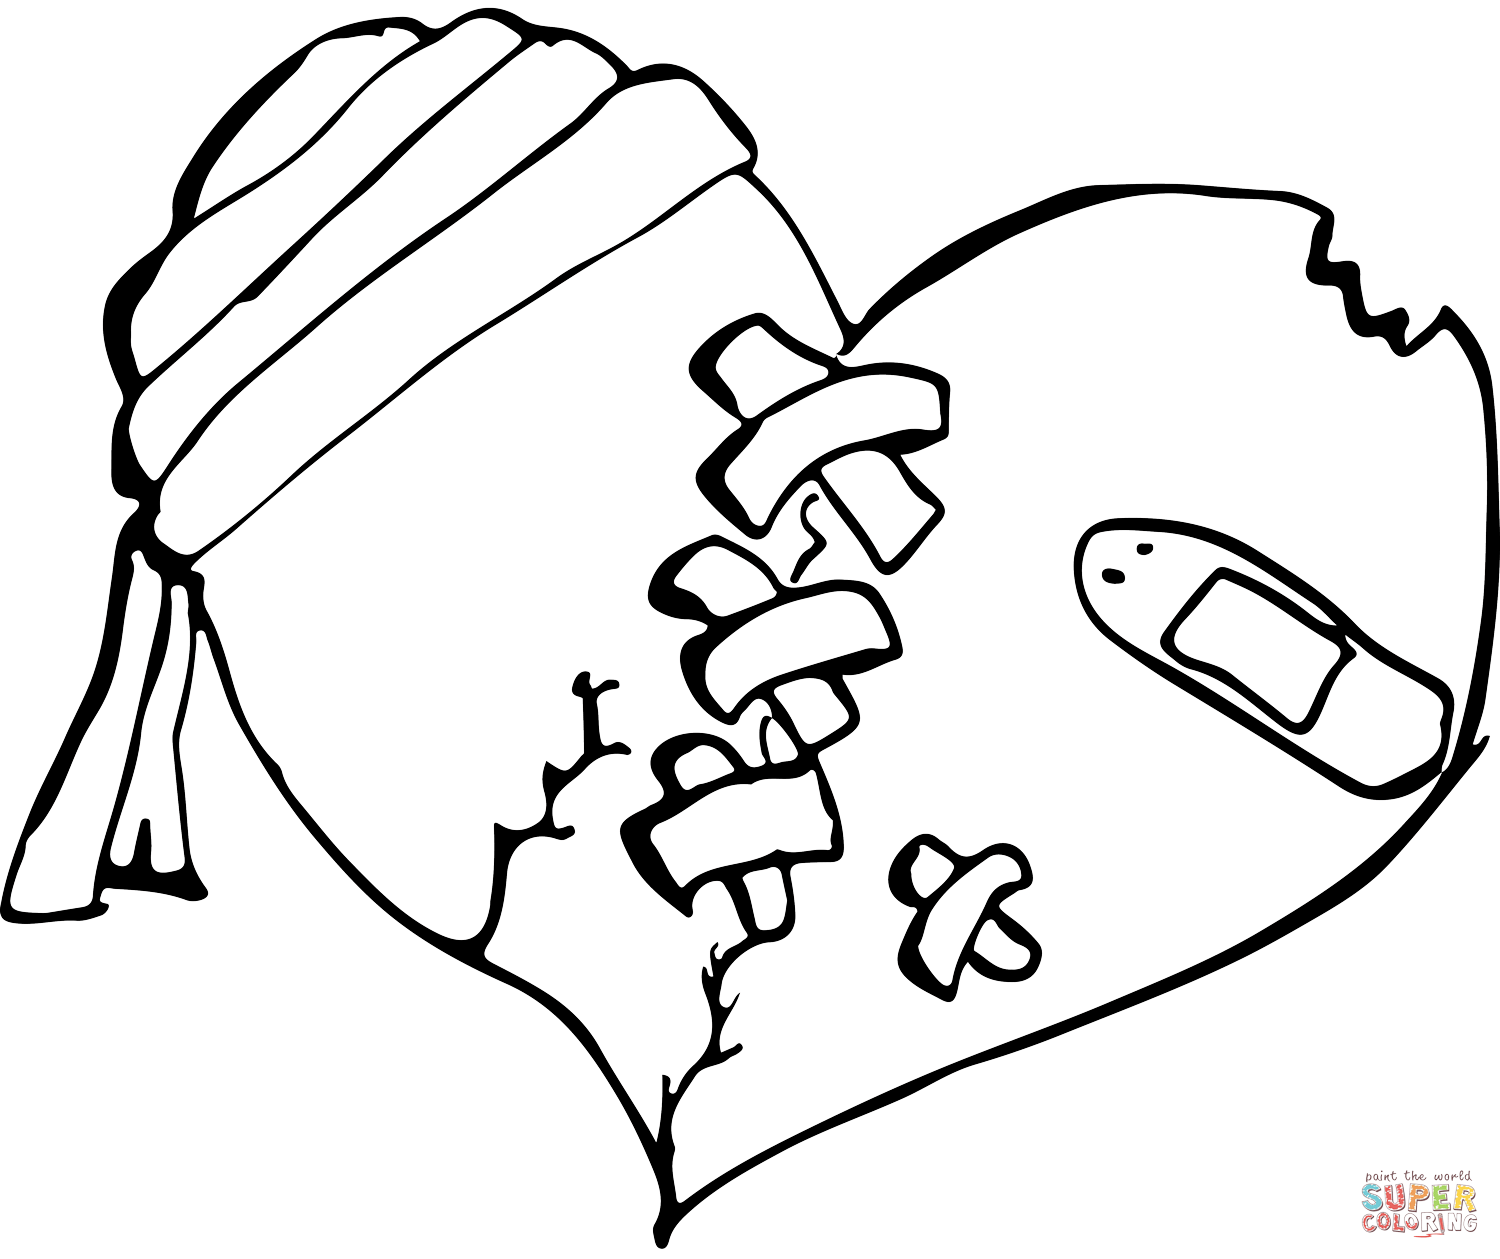 Mended broken heart coloring page free printable coloring pages